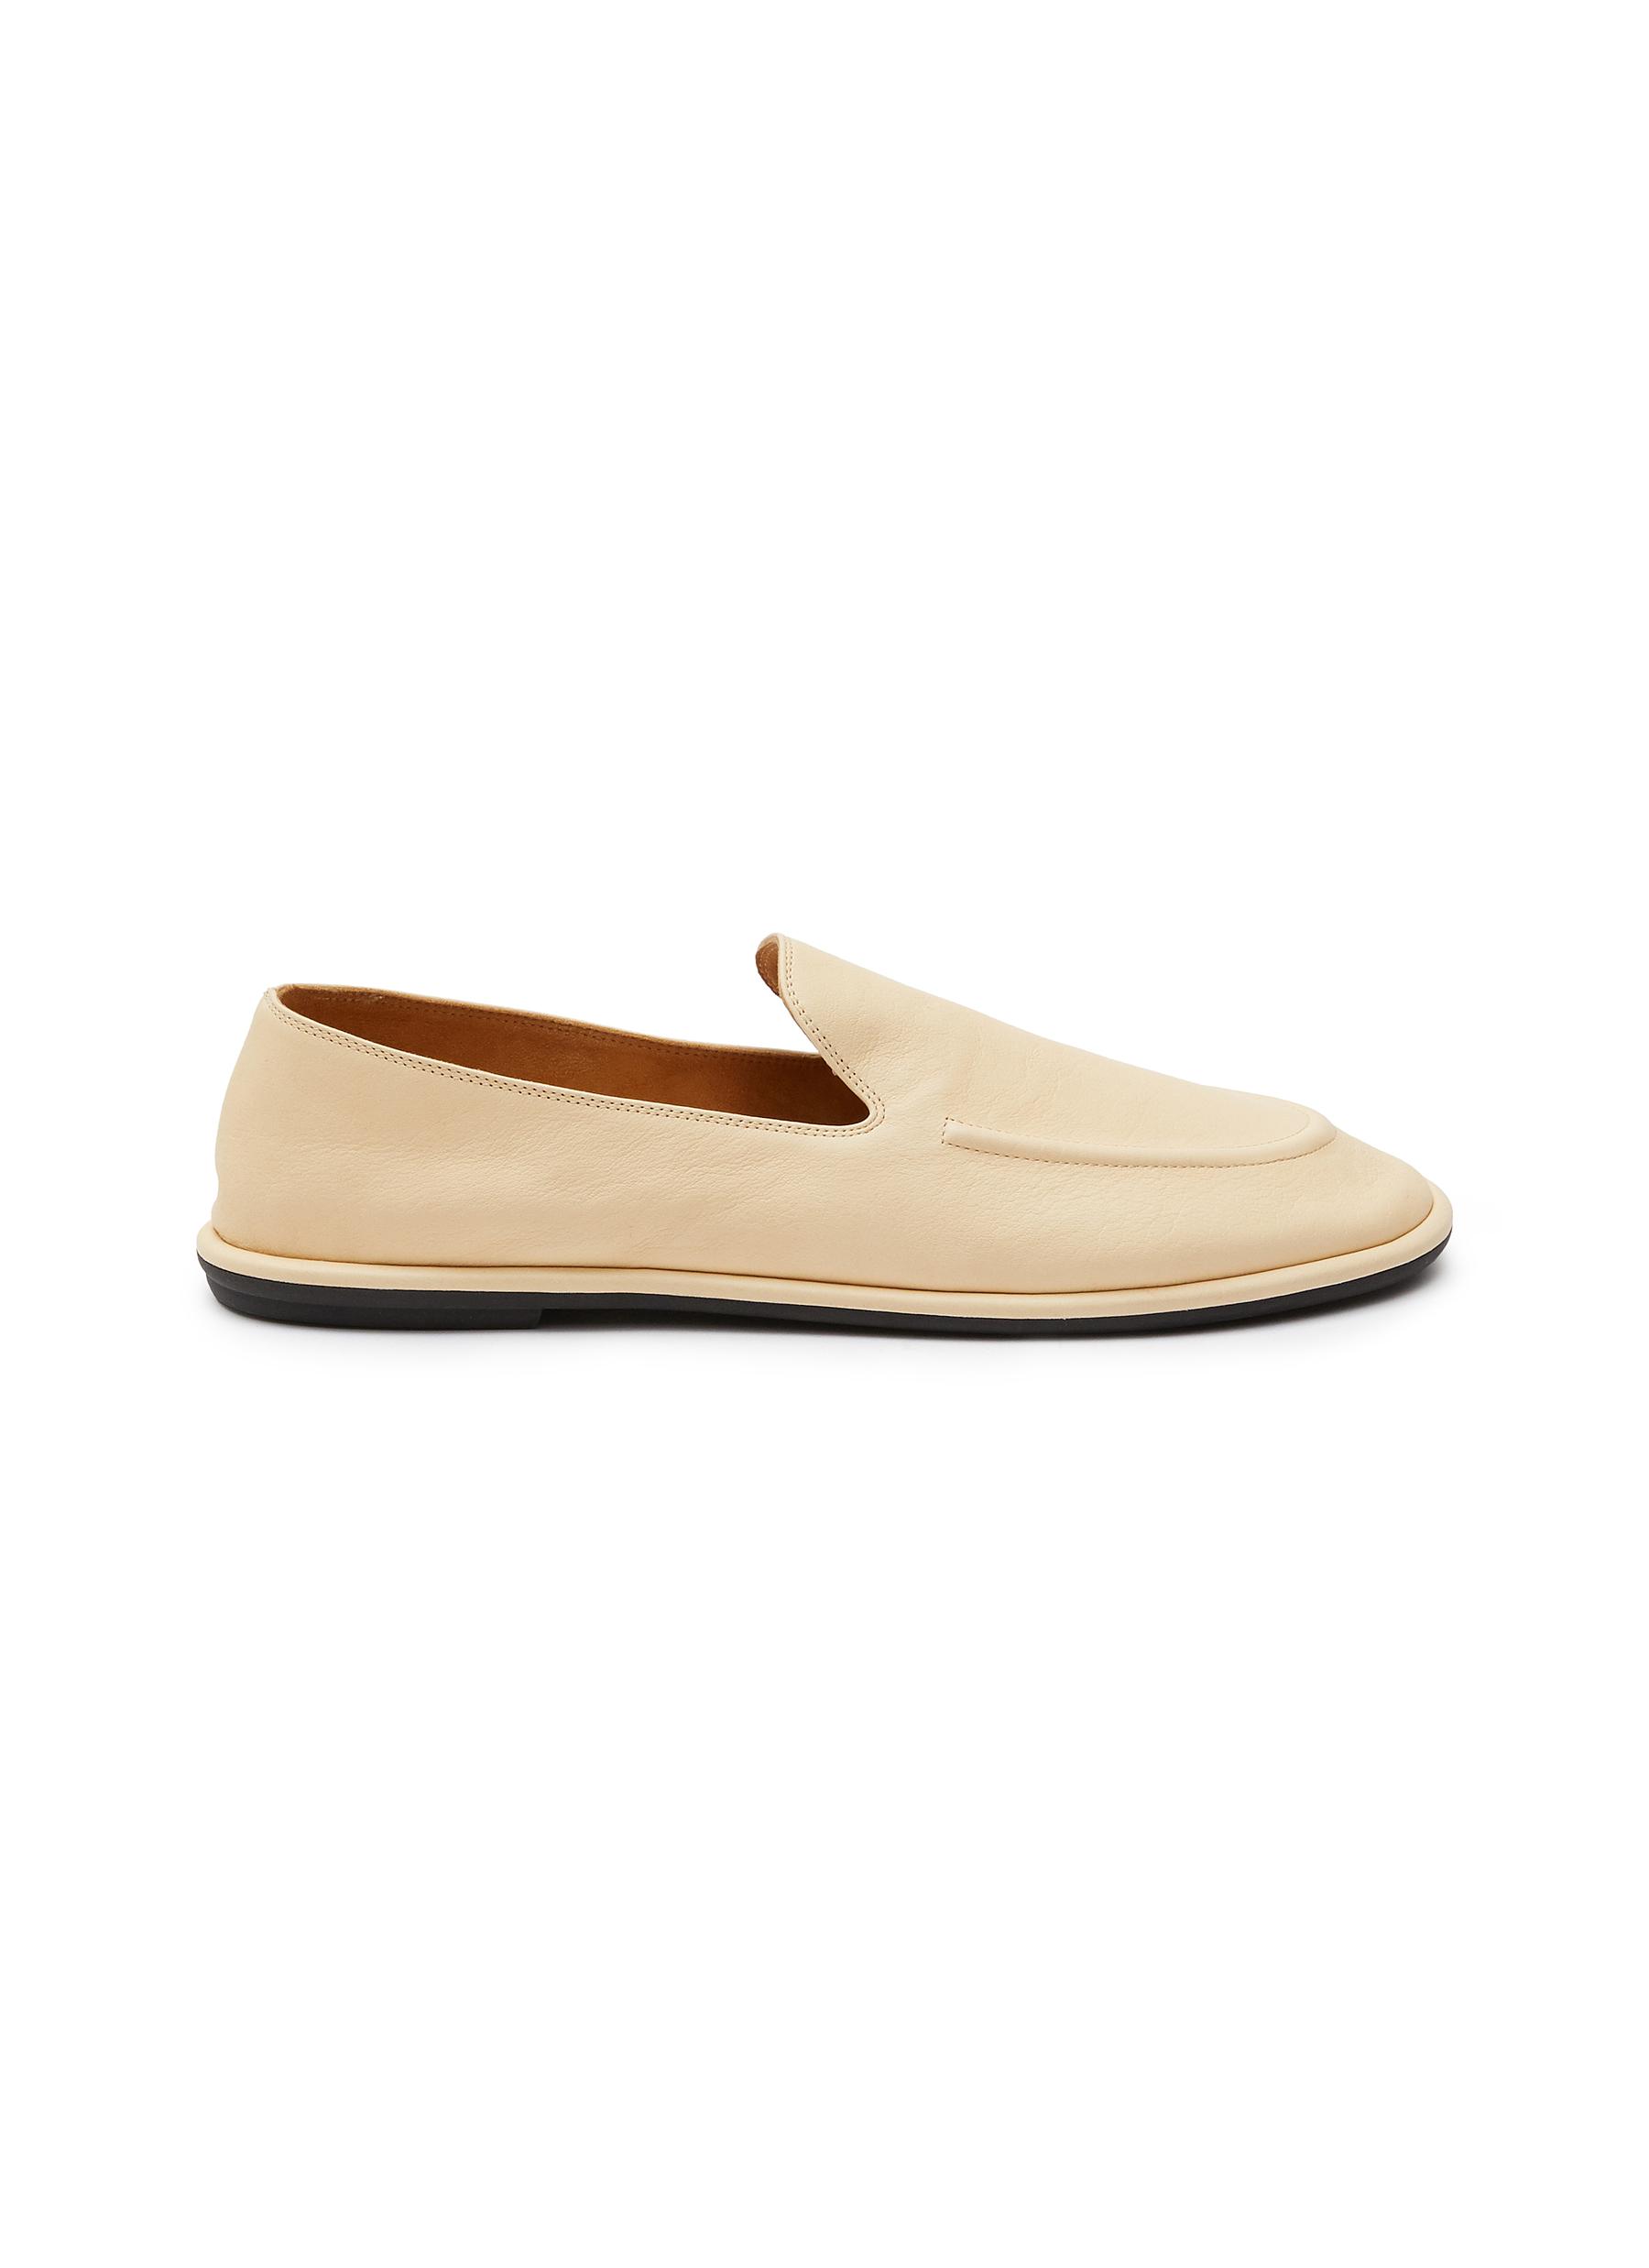 THE ROW 'Canel' vegan leather flat loafers